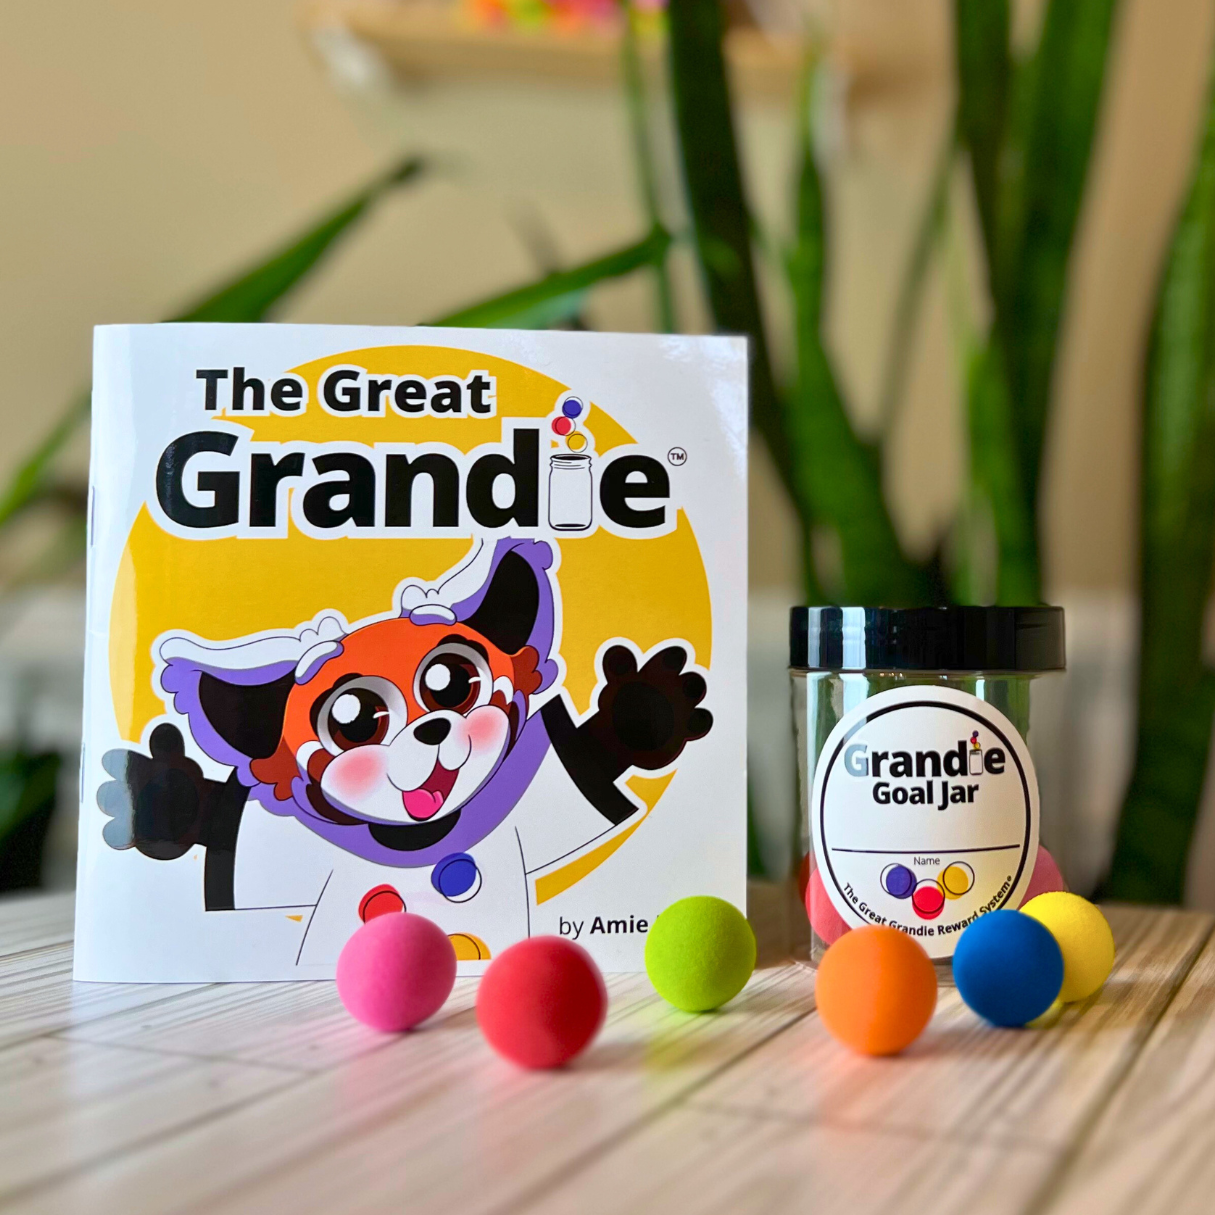 Image of 'The Great Grandie' book that is included in The Great Grandie Reward System kit, which helps younger users learn how to use the system